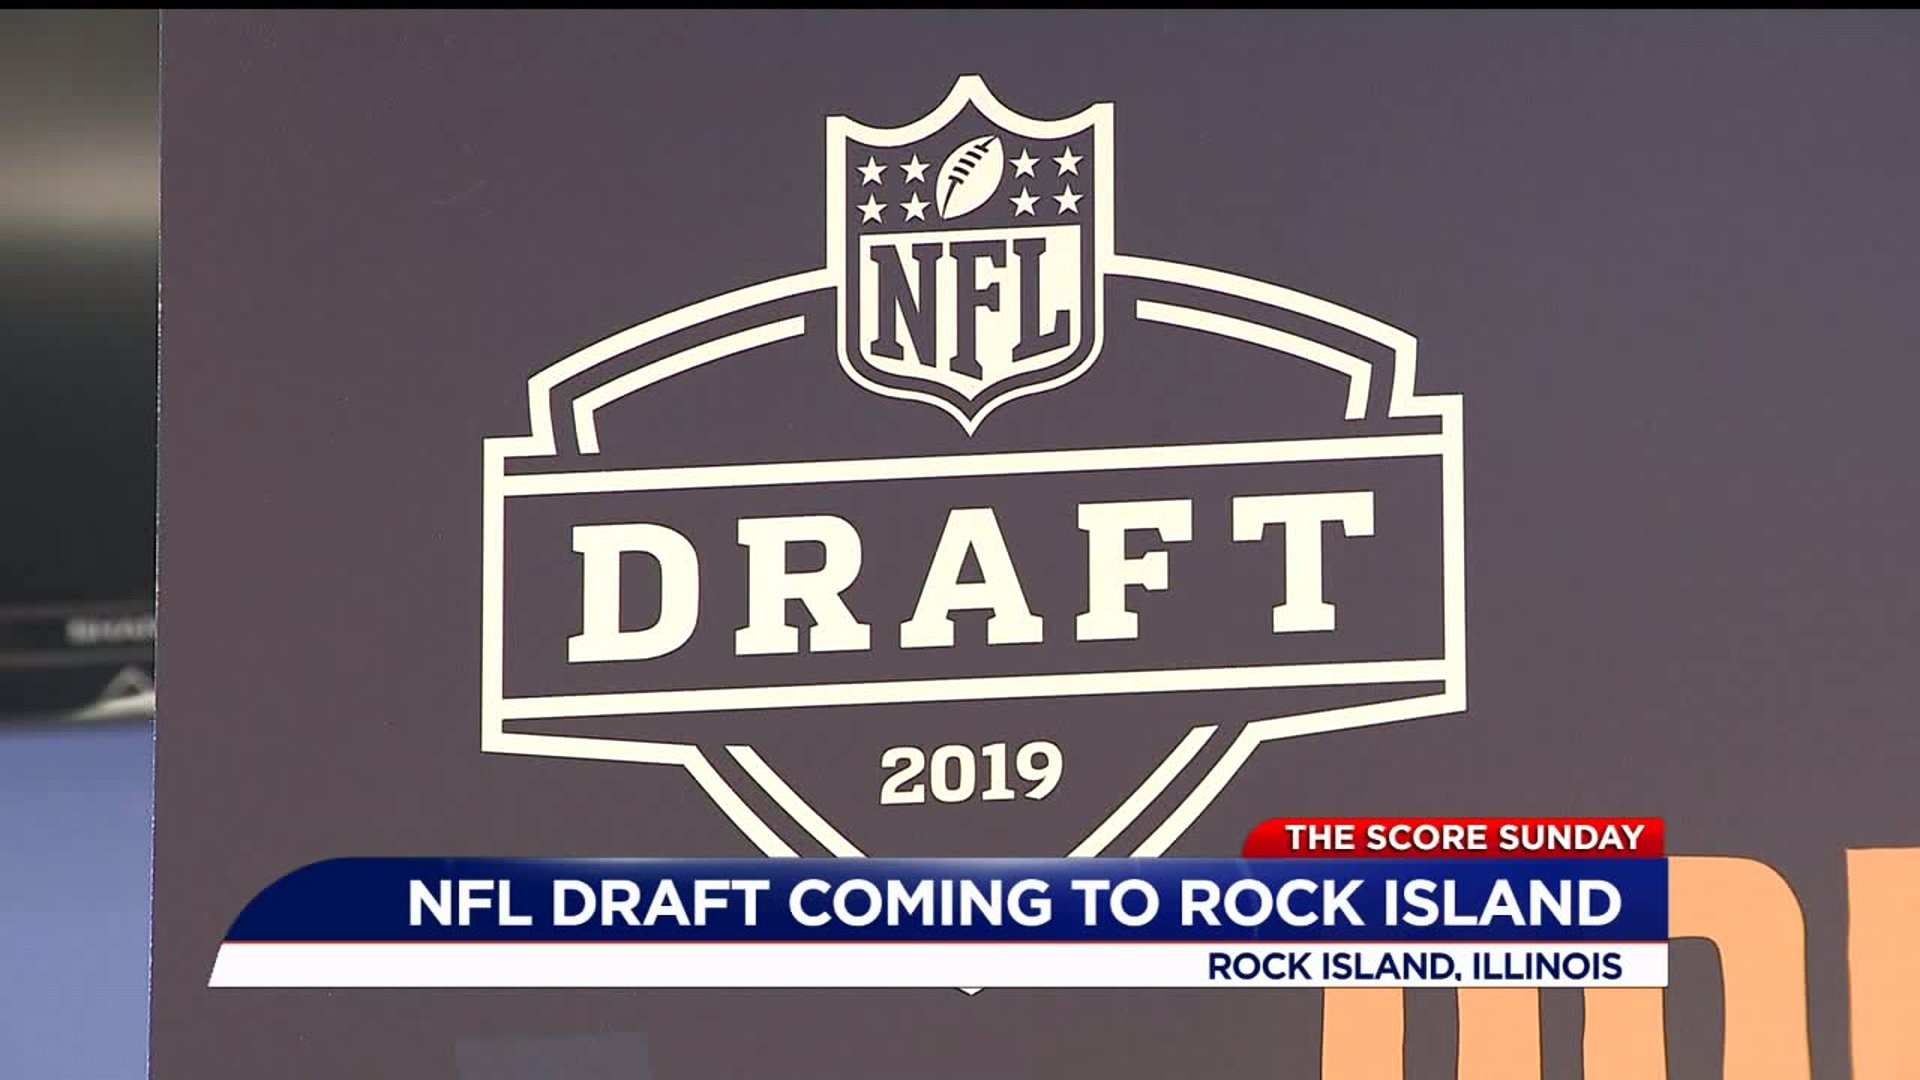 The Score Sunday - NFL Draft coming to Rock Island